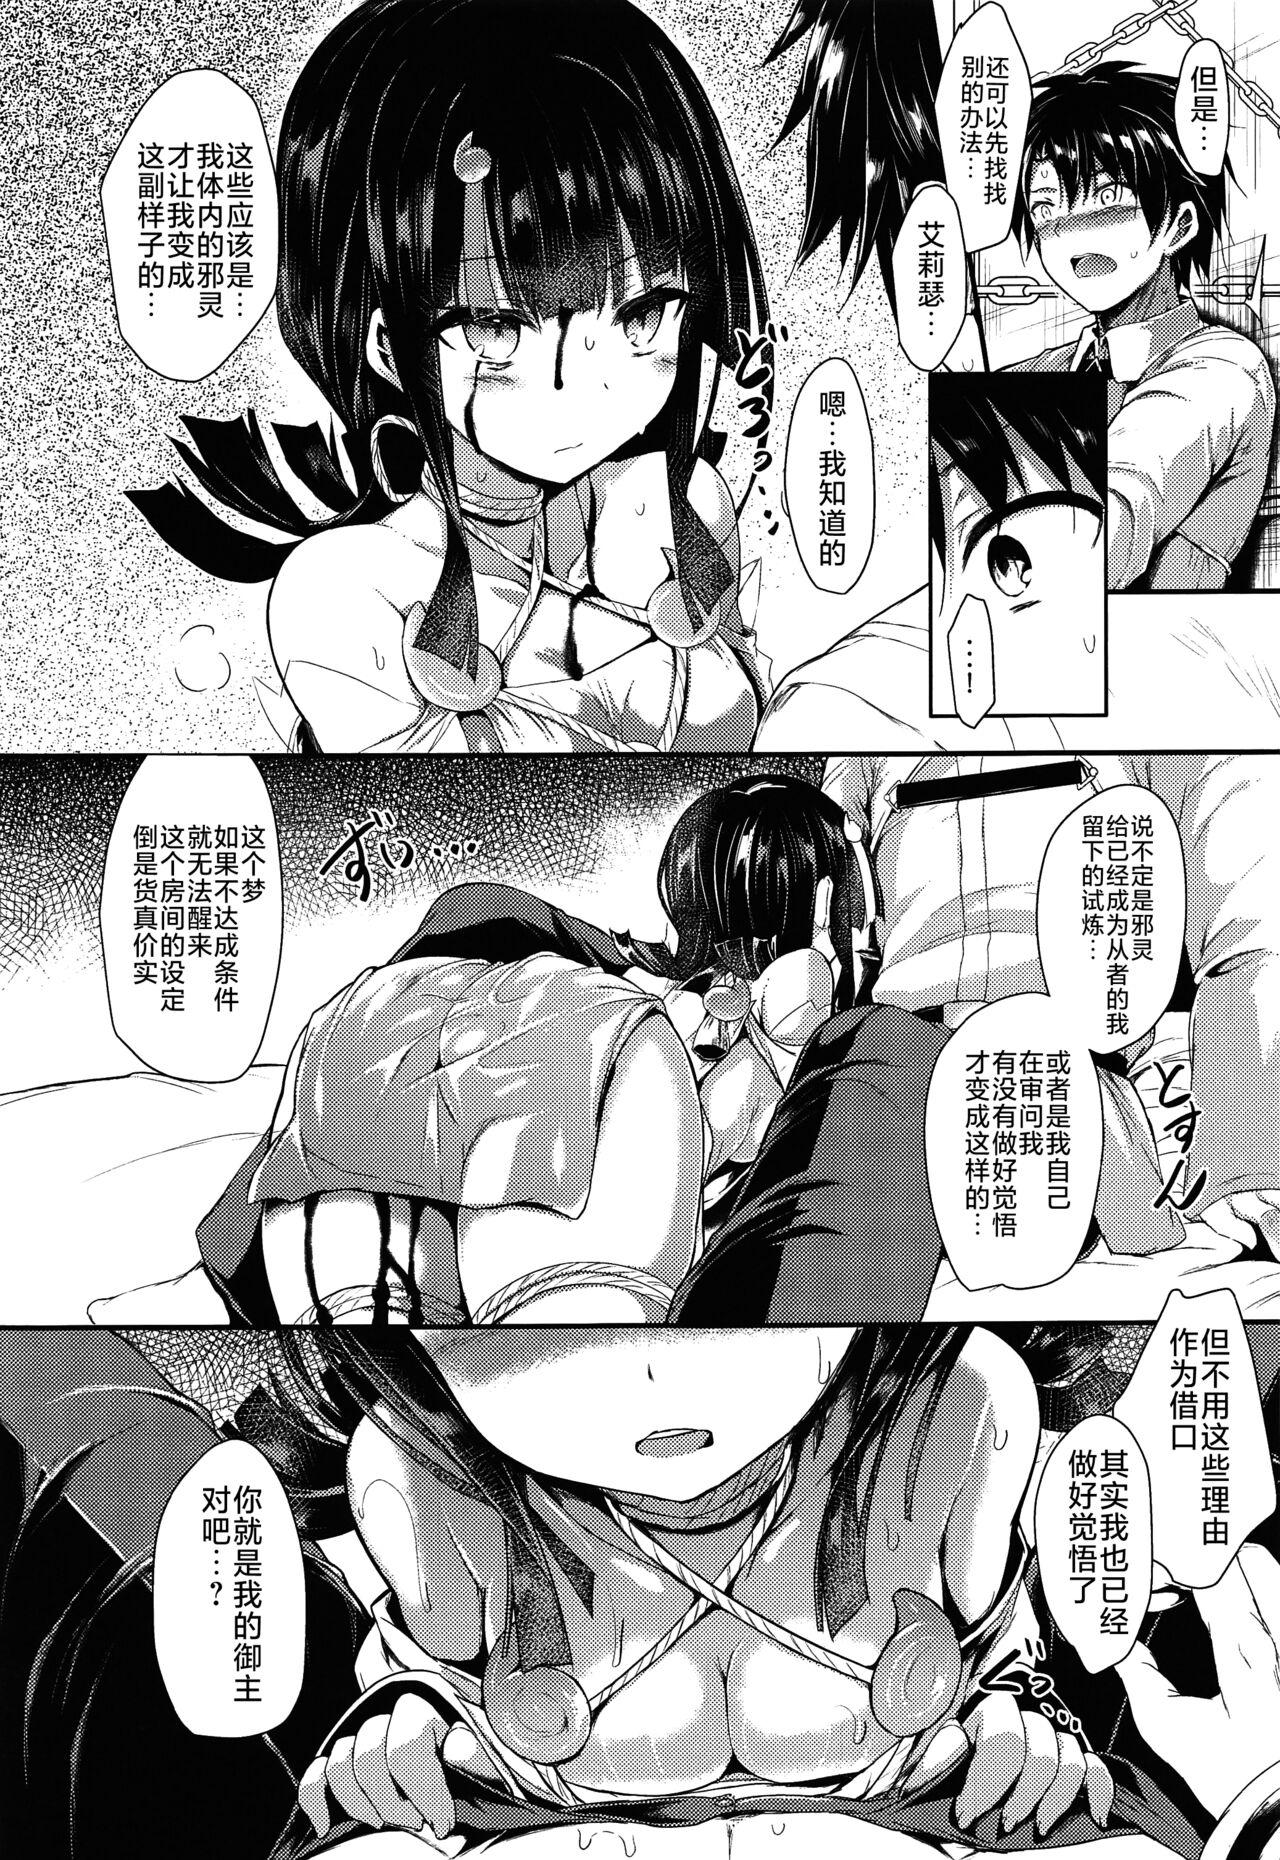 Women Sucking Dick etierise - Fate grand order Hijab - Page 6